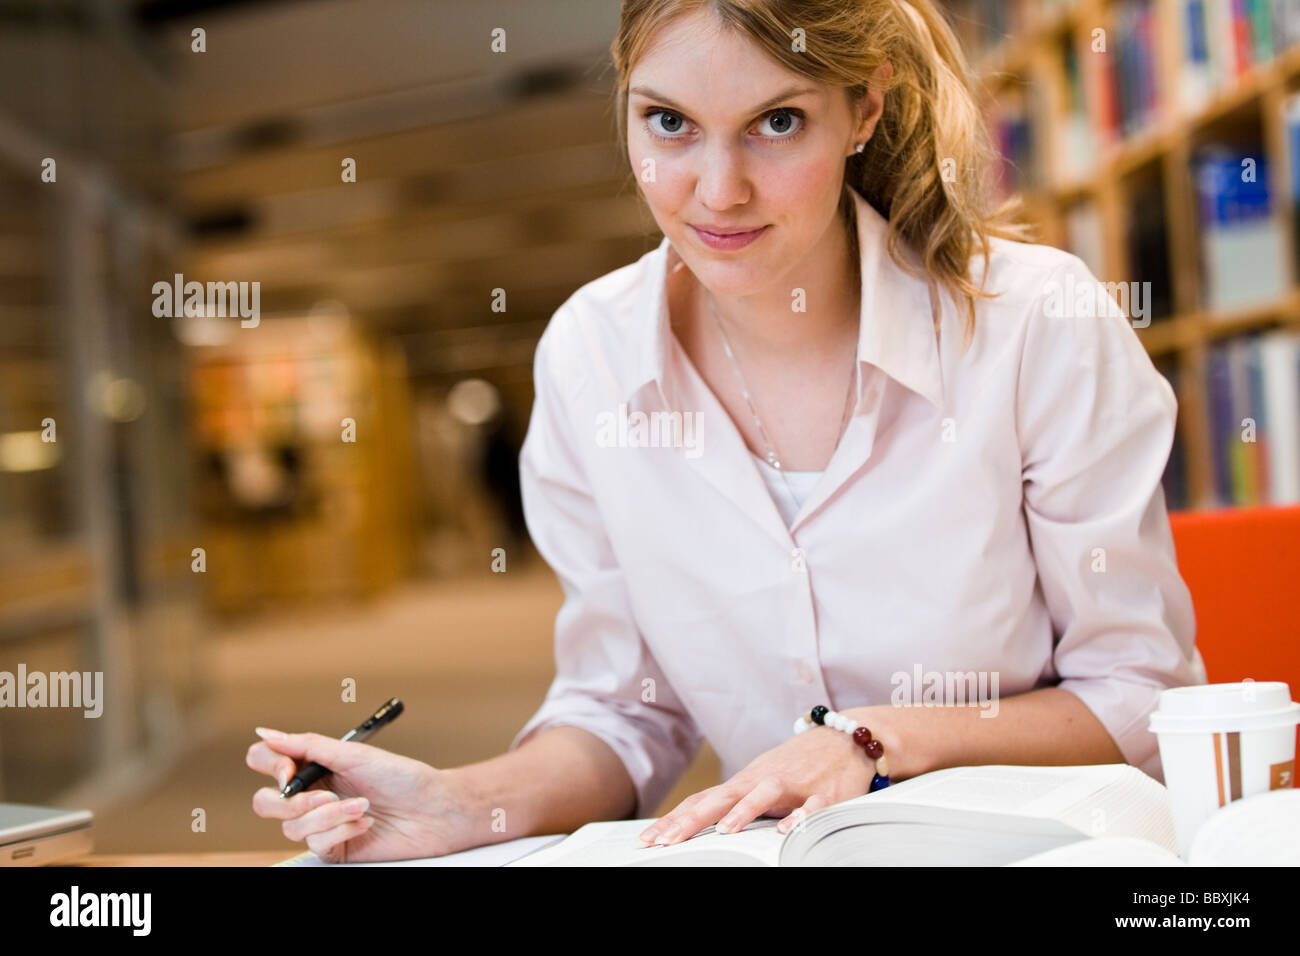 A female student studying in a library Sweden. Stock Photo